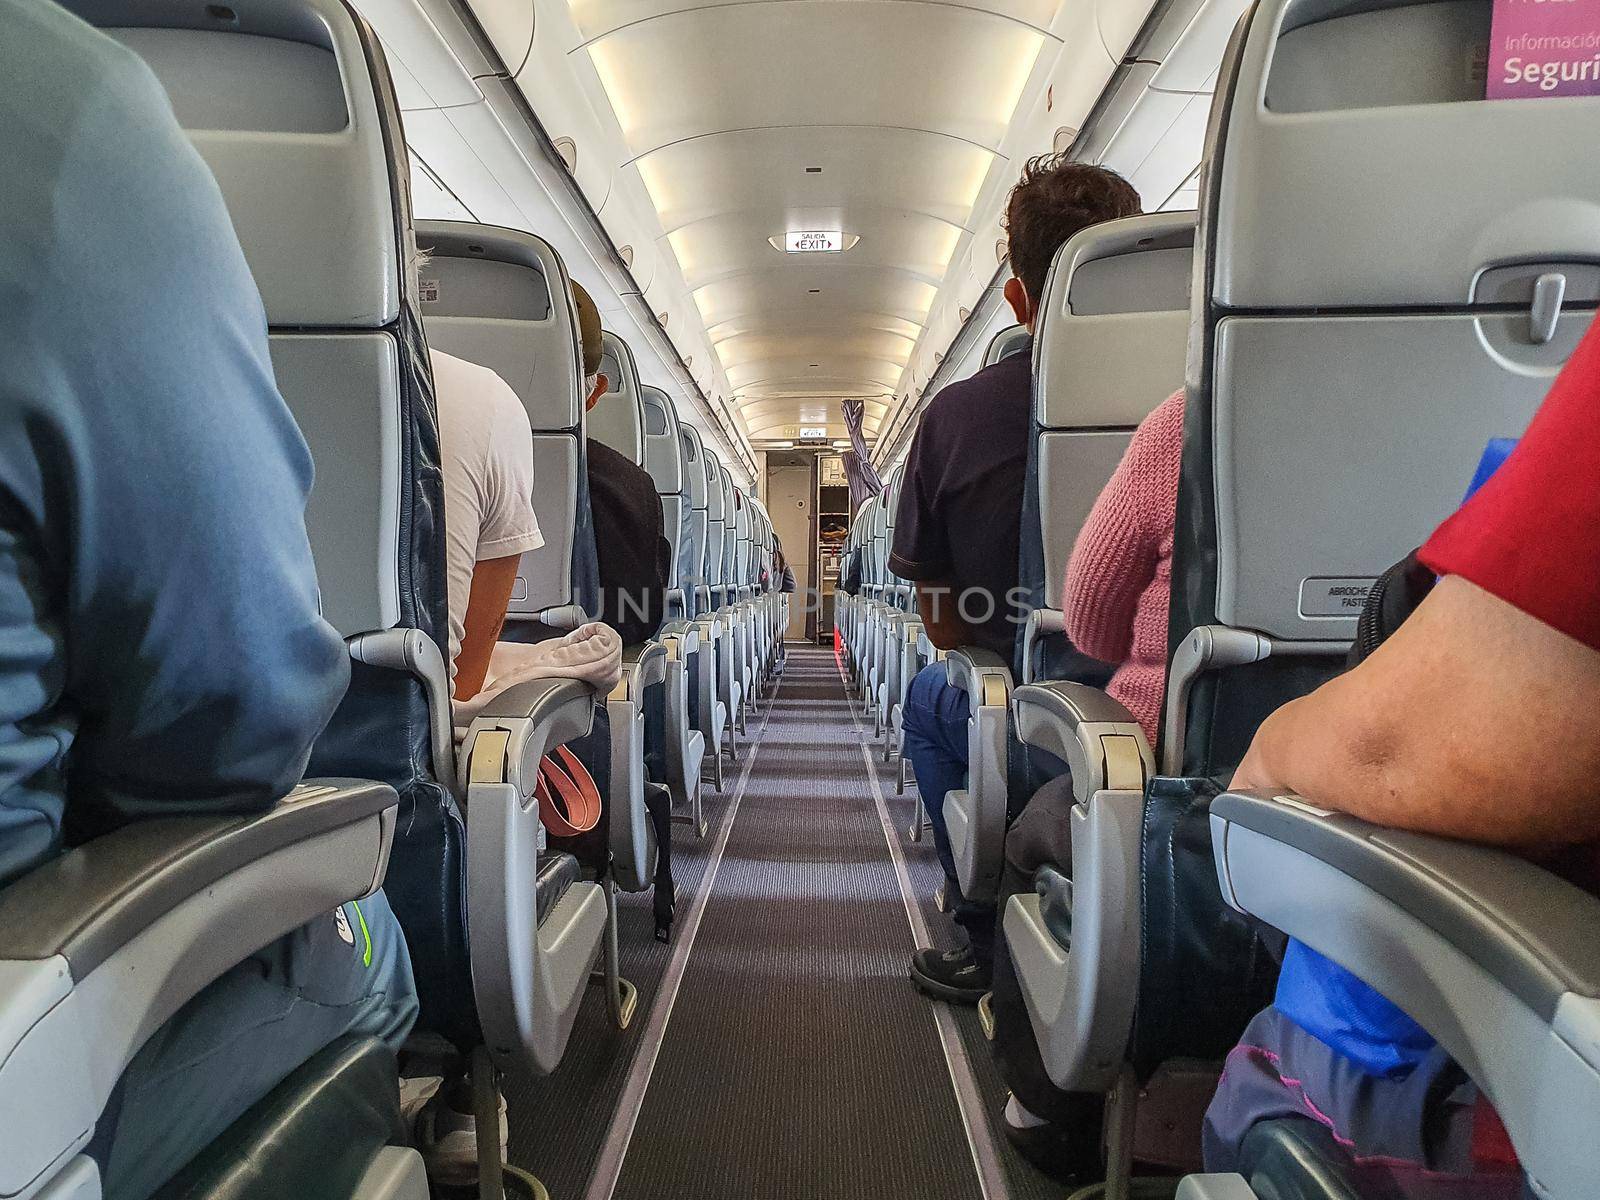 cabin of airplane with passengers on seats waiting to take off